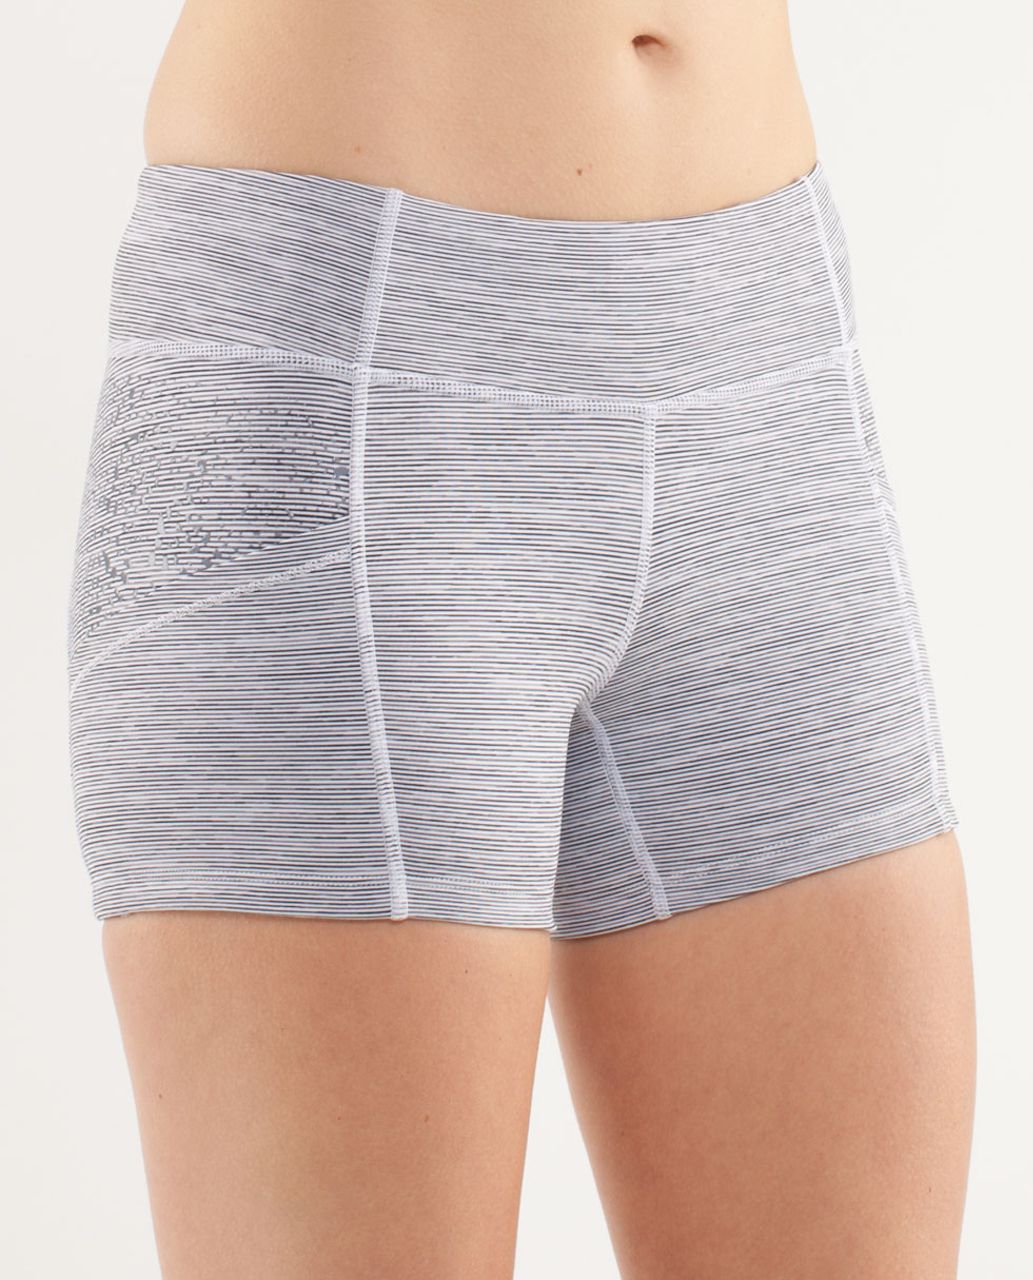 Lululemon Run:  Shorty Short - Wee Are From Space White Combo /  Cut Out Lace Silcone Fossil